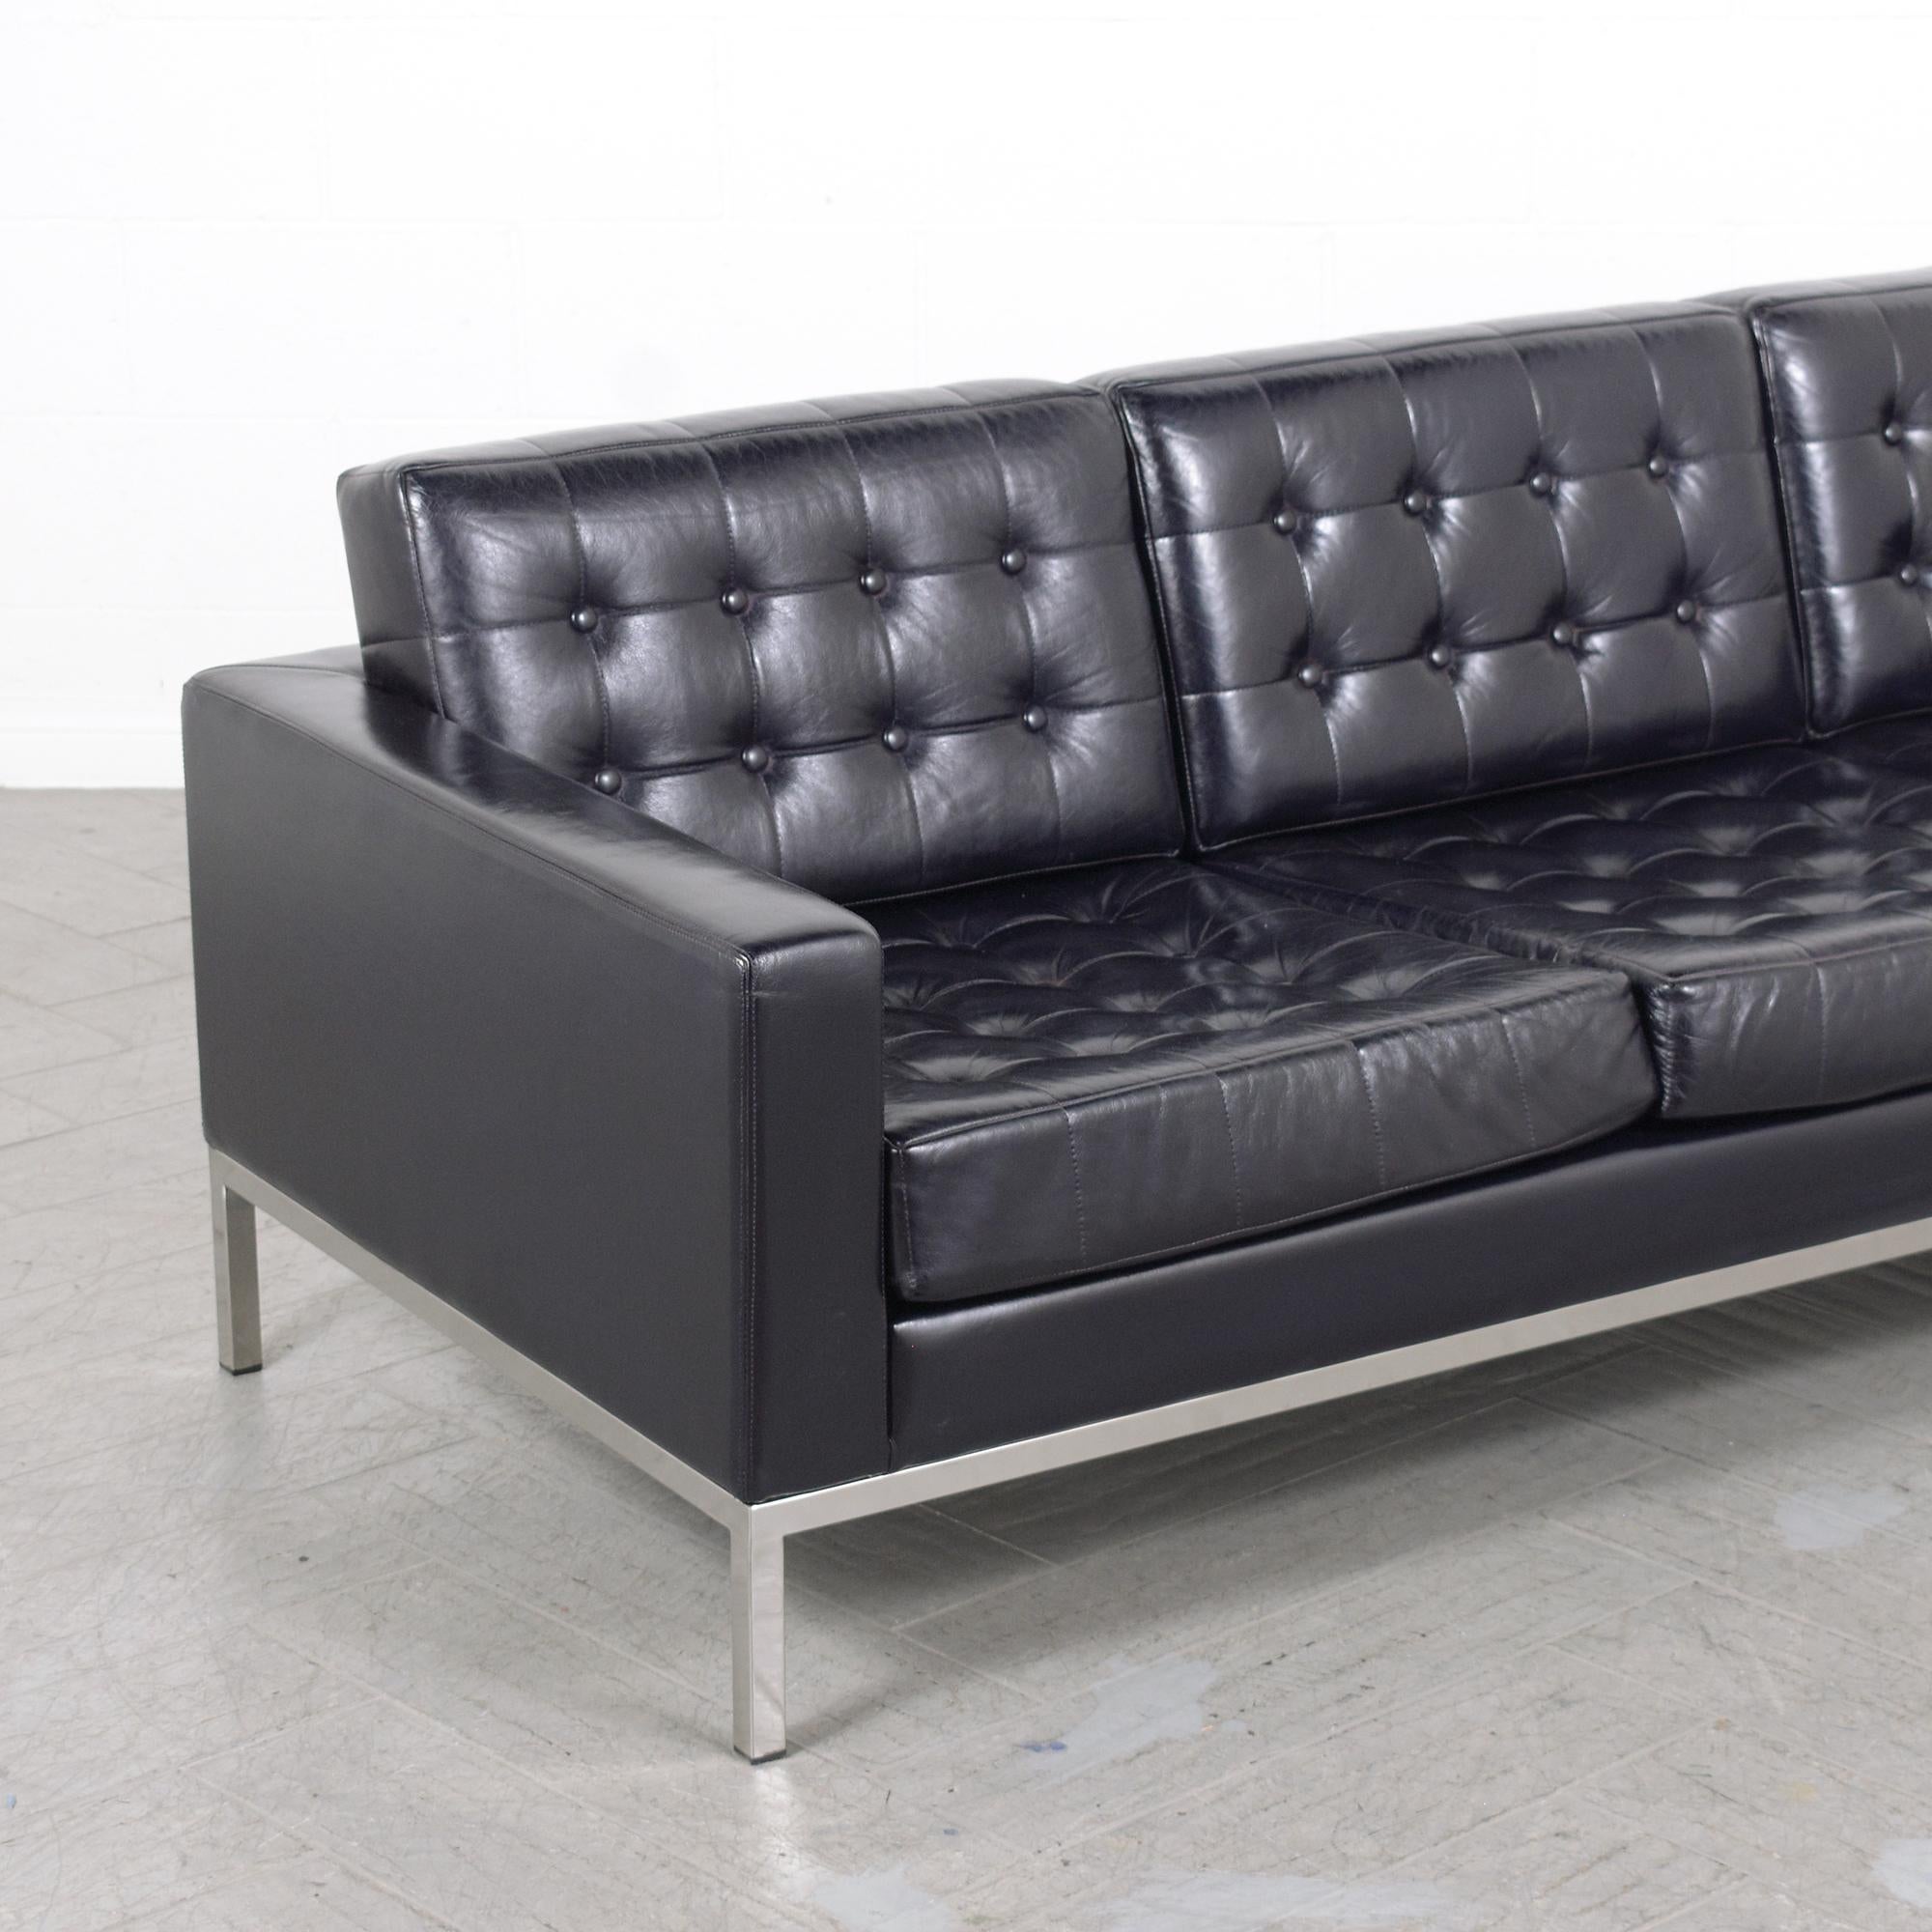 Late 20th Century 1980s Vintage Leather Sofa: Timeless Mid-Century Elegance Restored For Sale